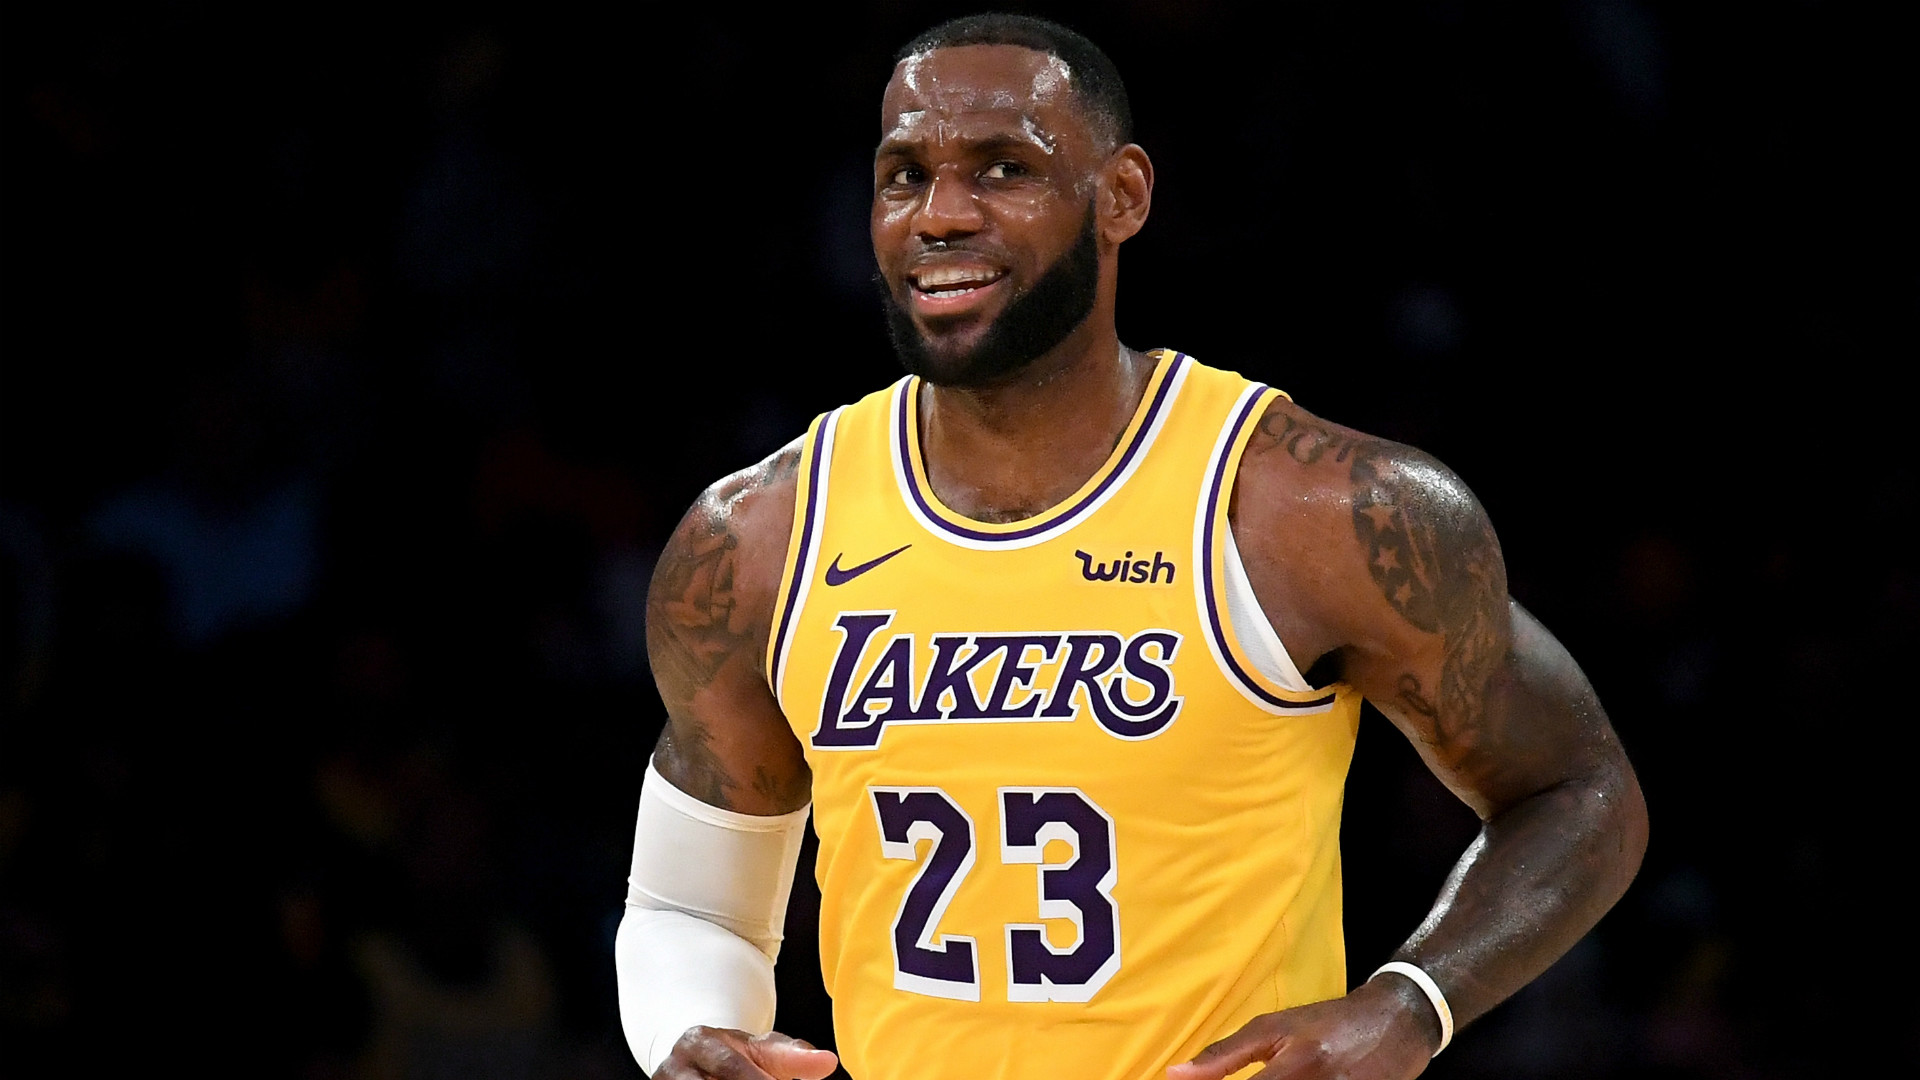 Watch Nike Releases Inspiring Lebron James Ad 1920x1080